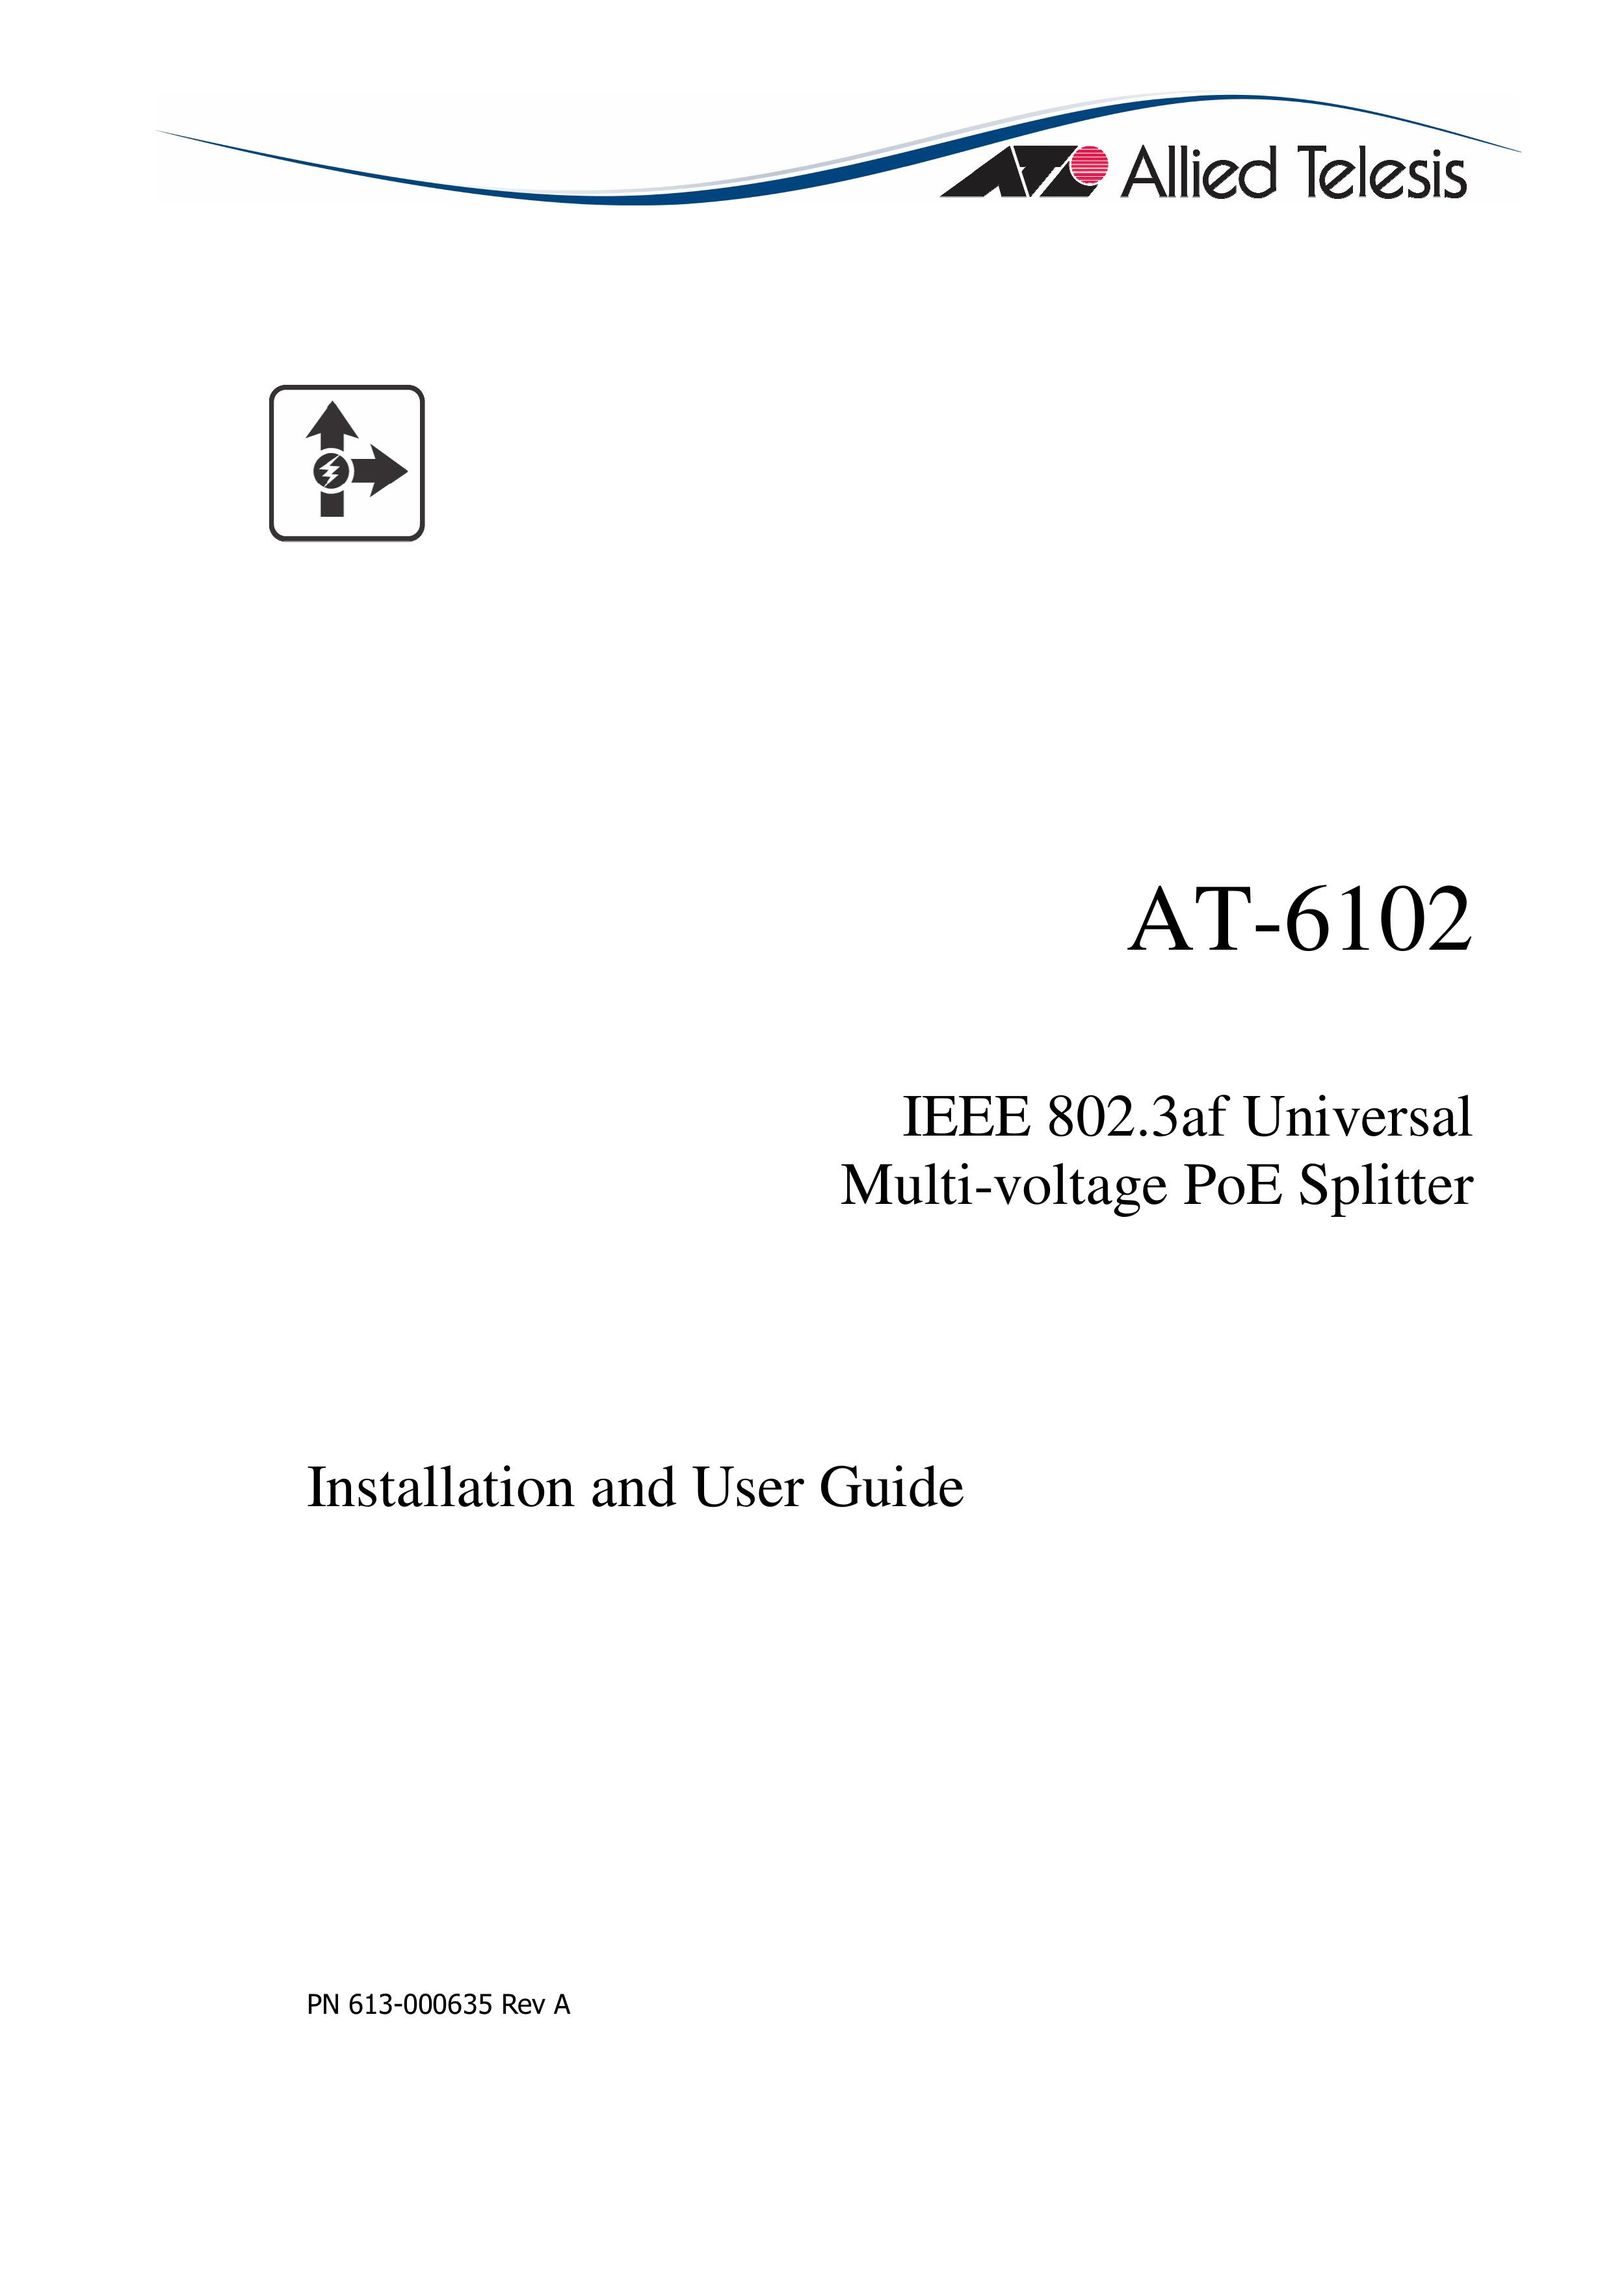 Allied Telesis AT-6102 Network Hardware User Manual